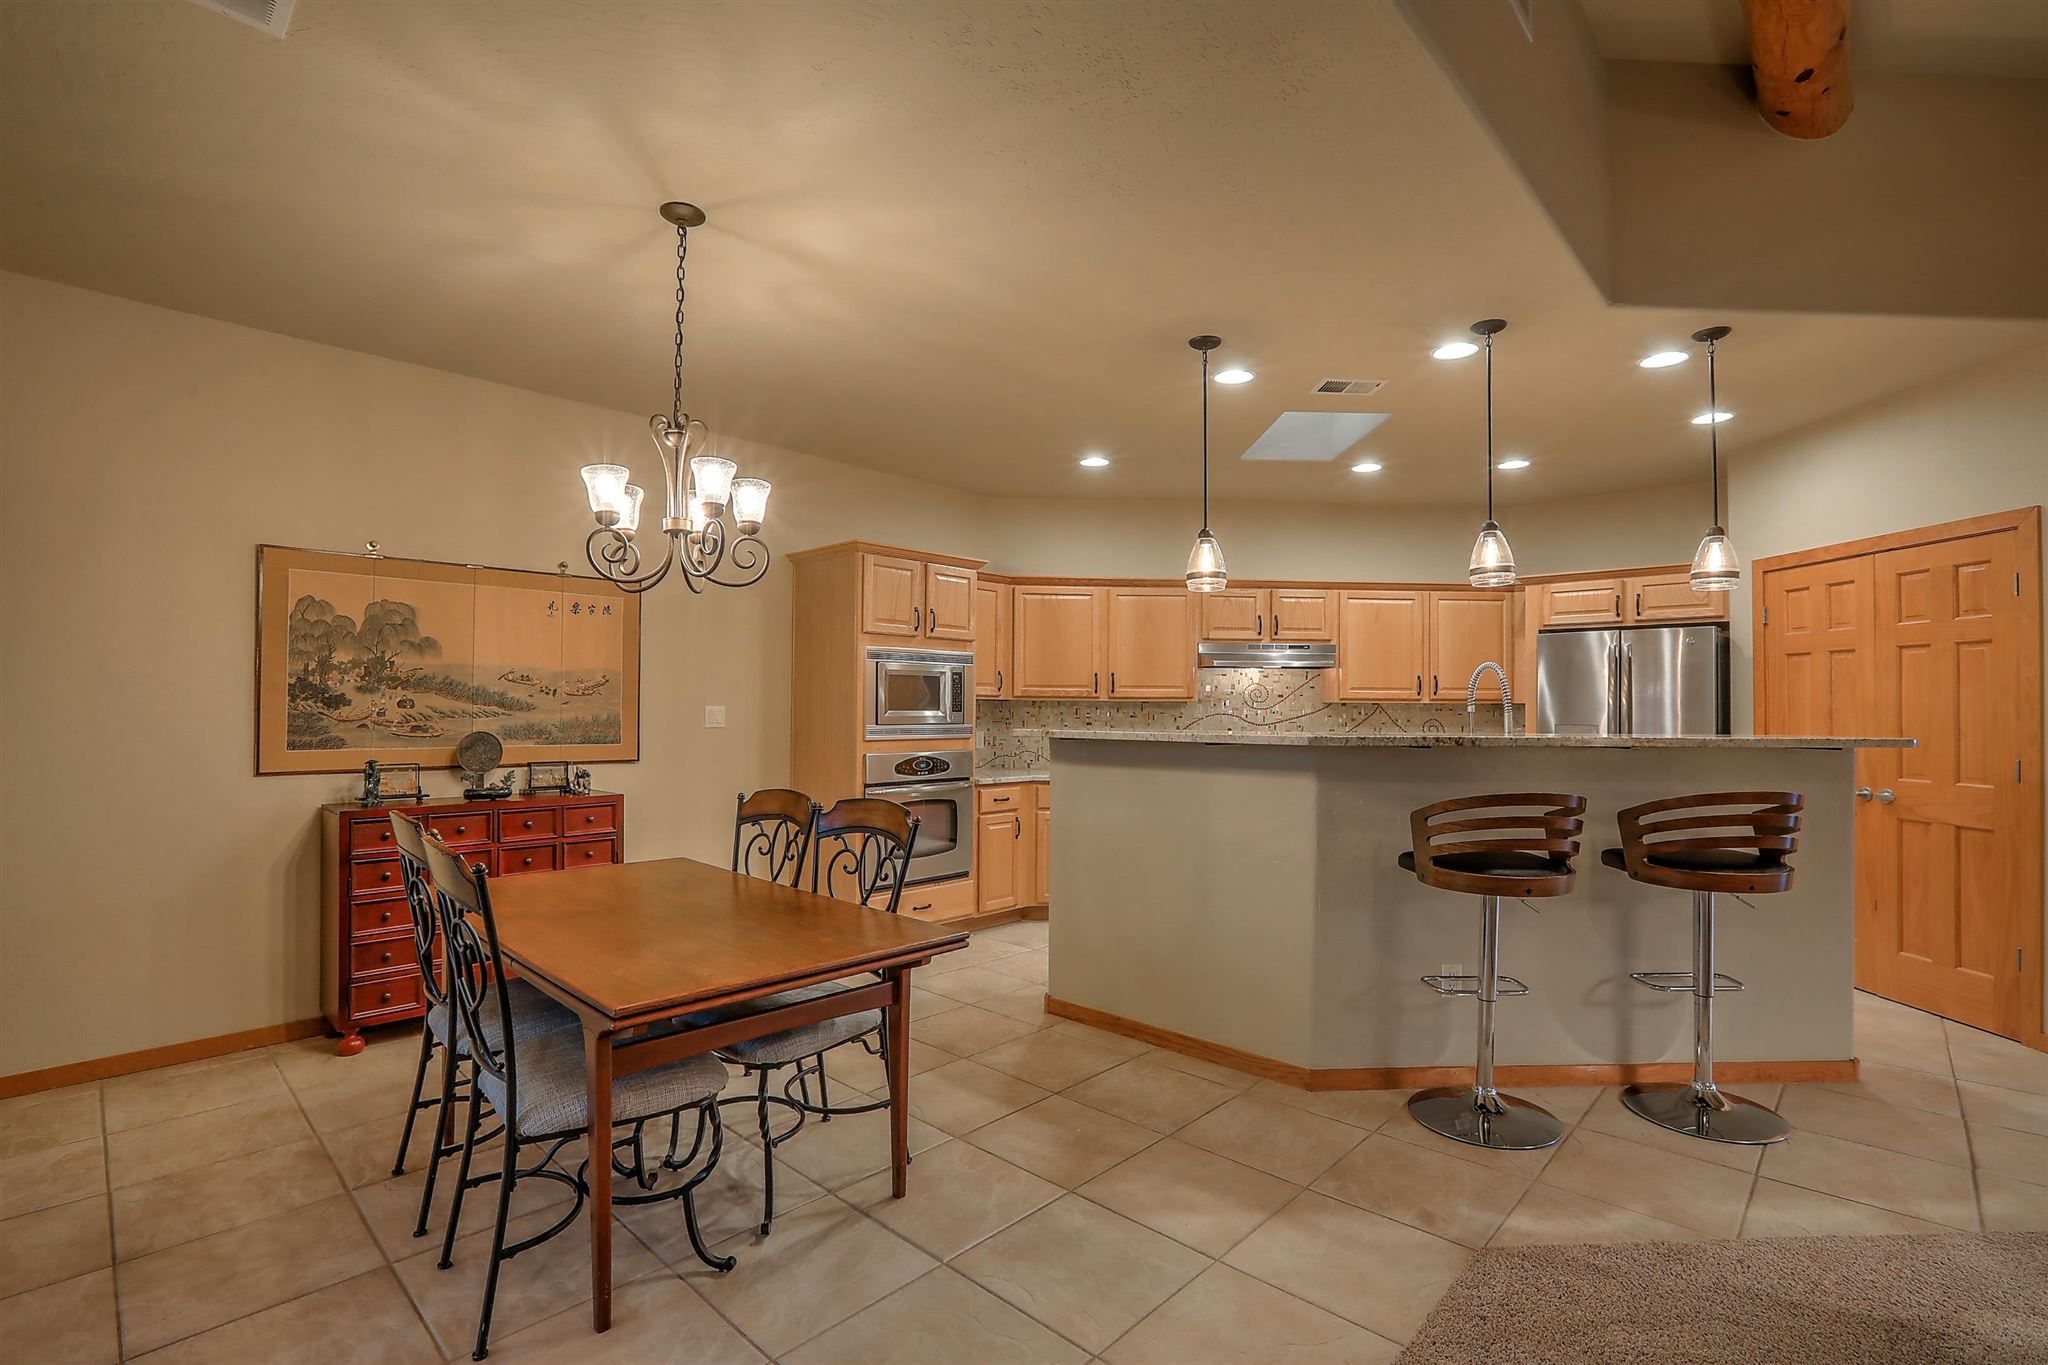 6830 Oersted, Rio Rancho, New Mexico 87144, 3 Bedrooms Bedrooms, ,2 BathroomsBathrooms,Residential,For Sale,6830 Oersted,202102907